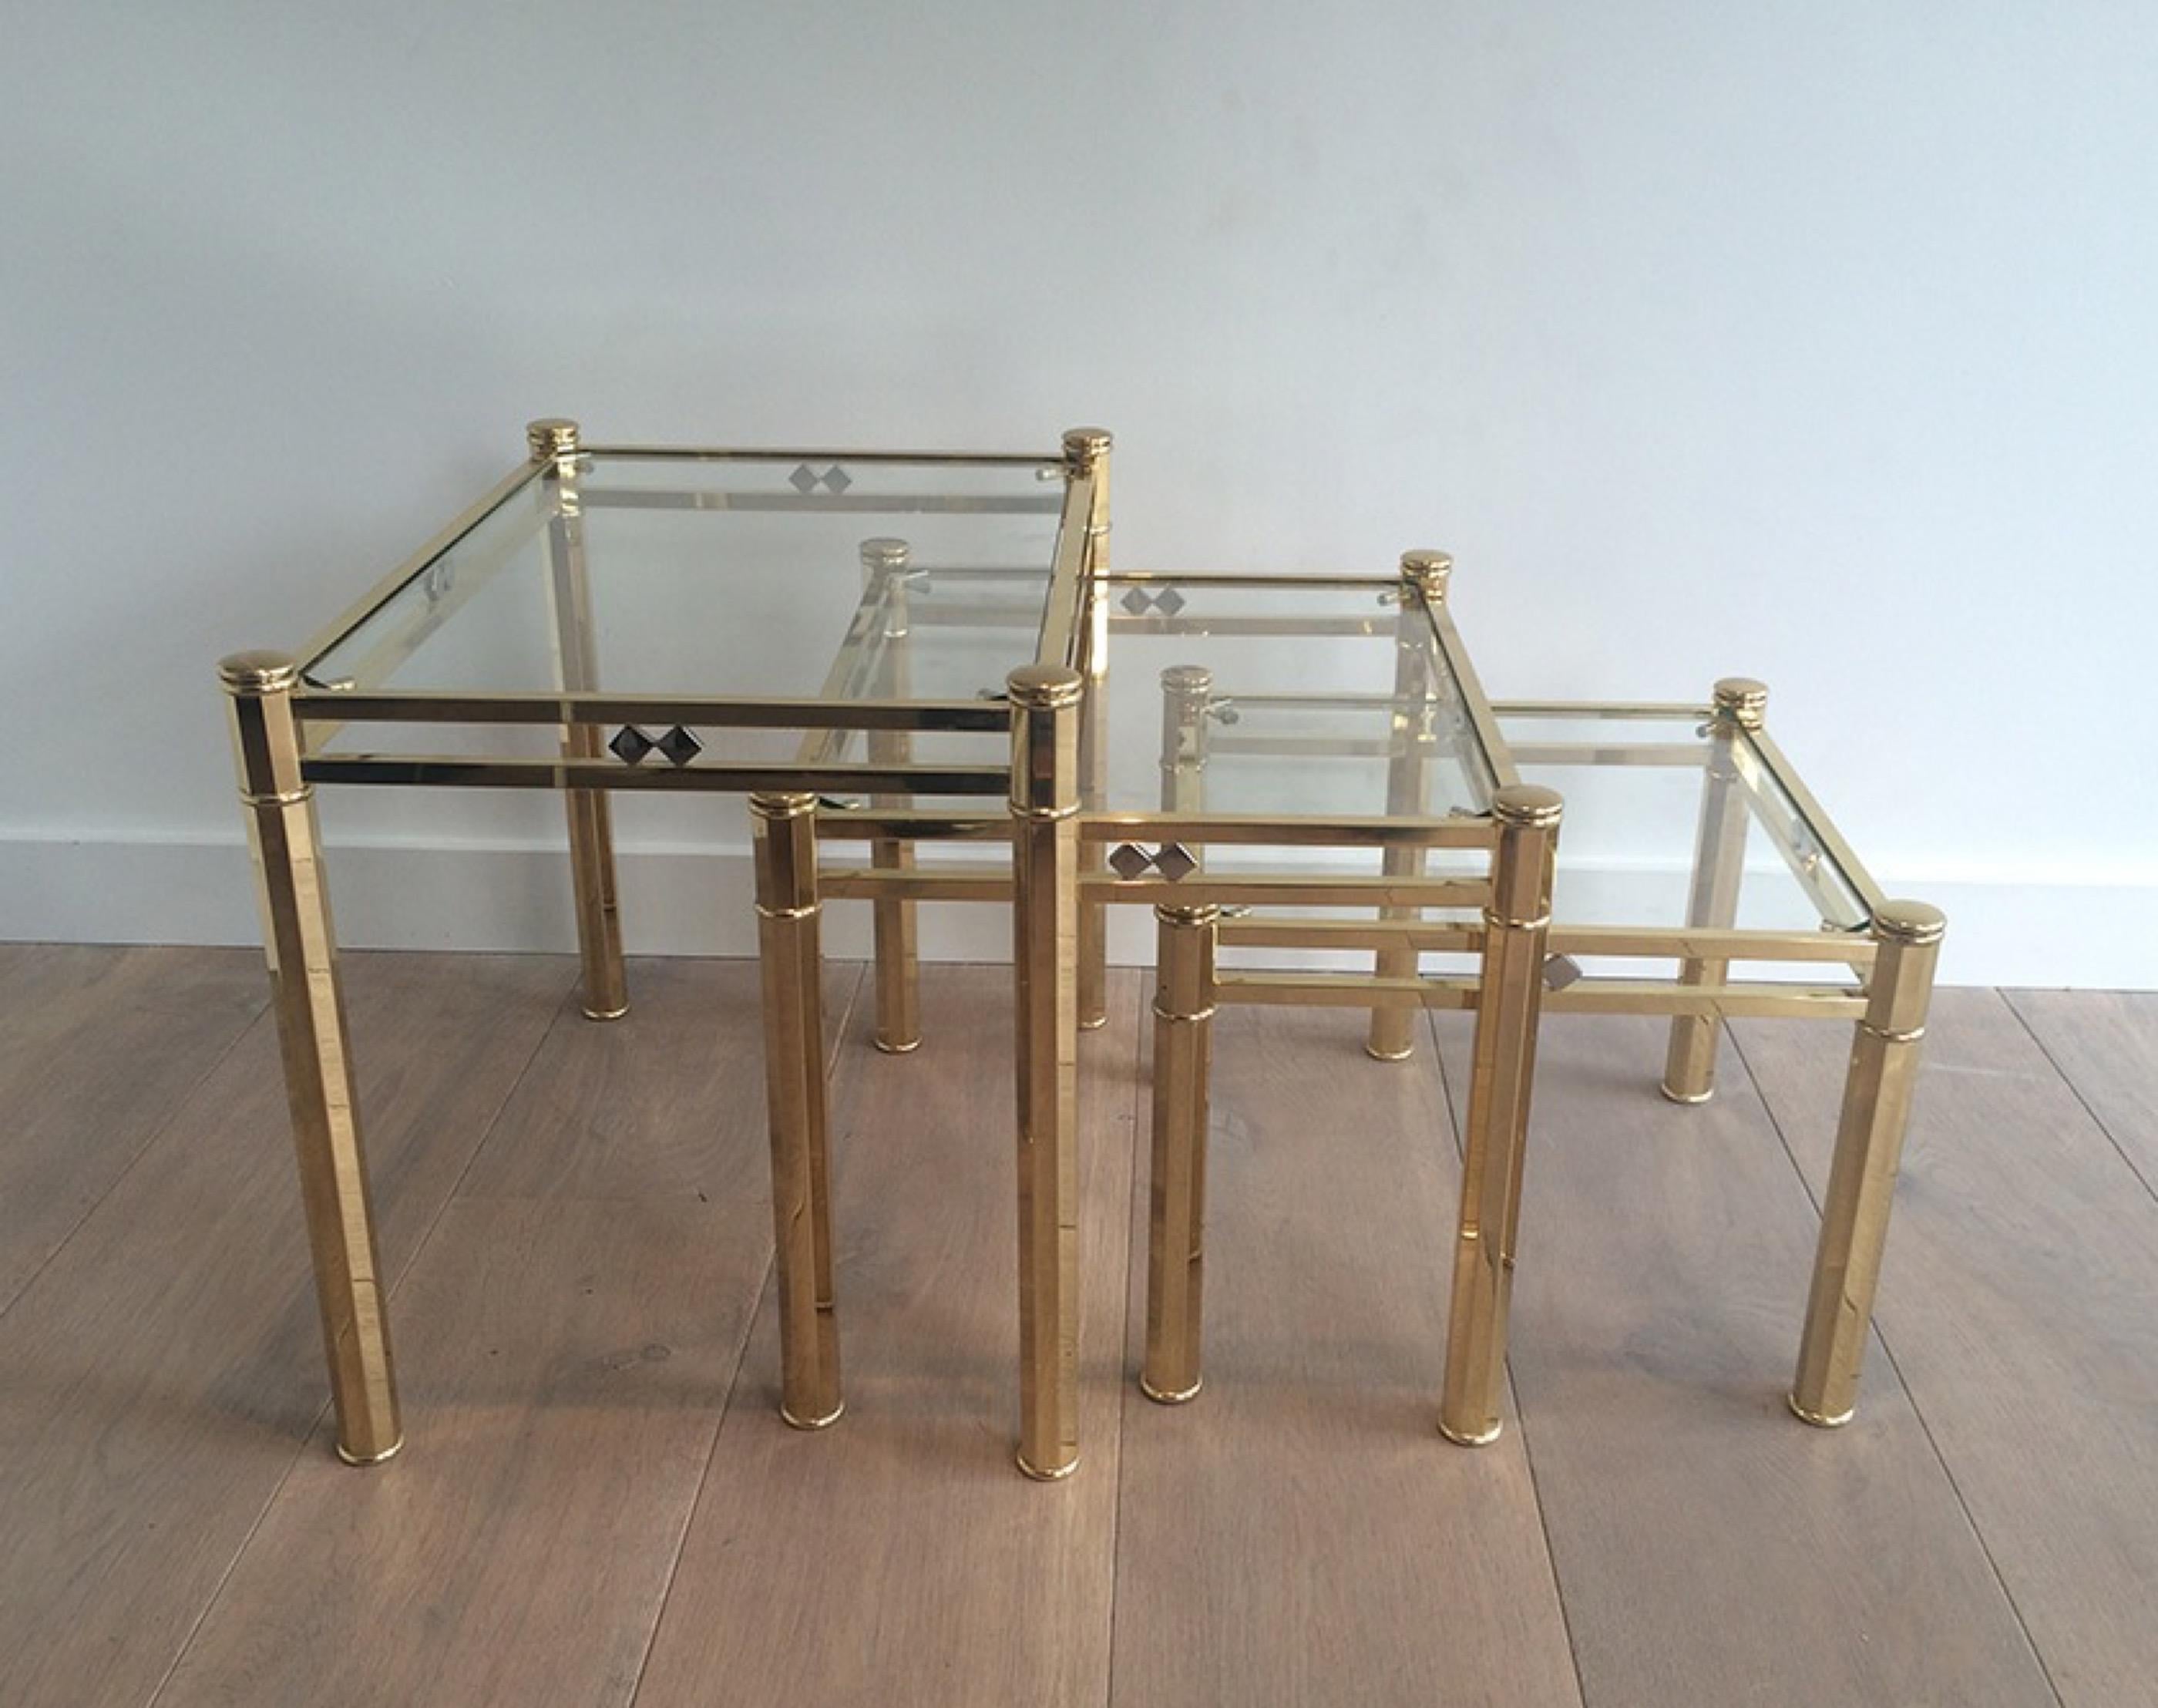 This very nice set of 3 decorative nesting tables is made of brass with clear glass shelves. This is a French work of very good quality, circa 1970.